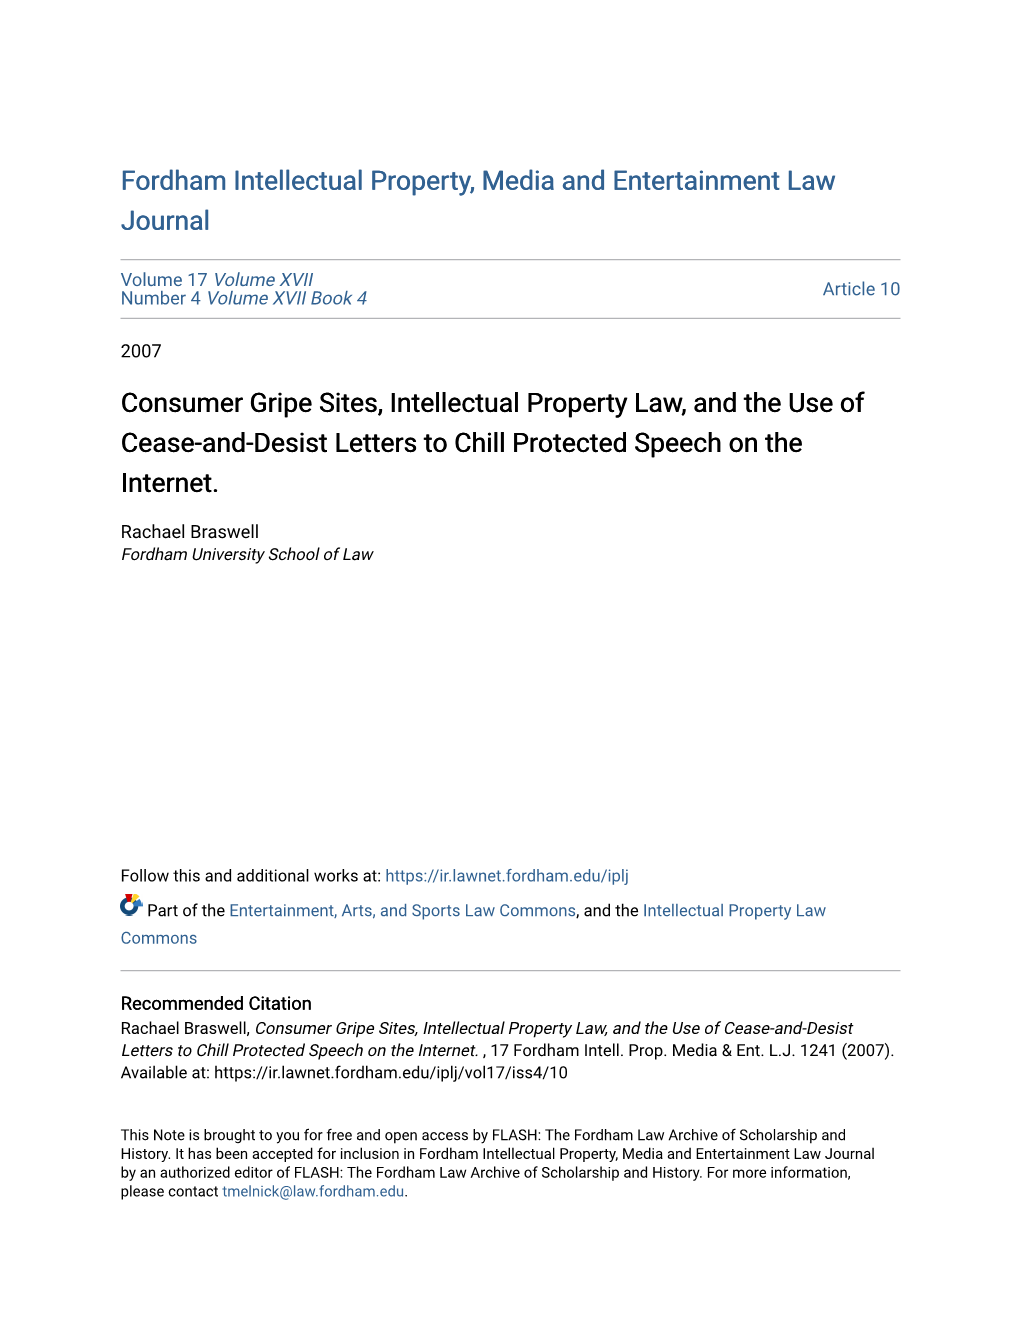 Consumer Gripe Sites, Intellectual Property Law, and the Use of Cease-And-Desist Letters to Chill Protected Speech on the Internet